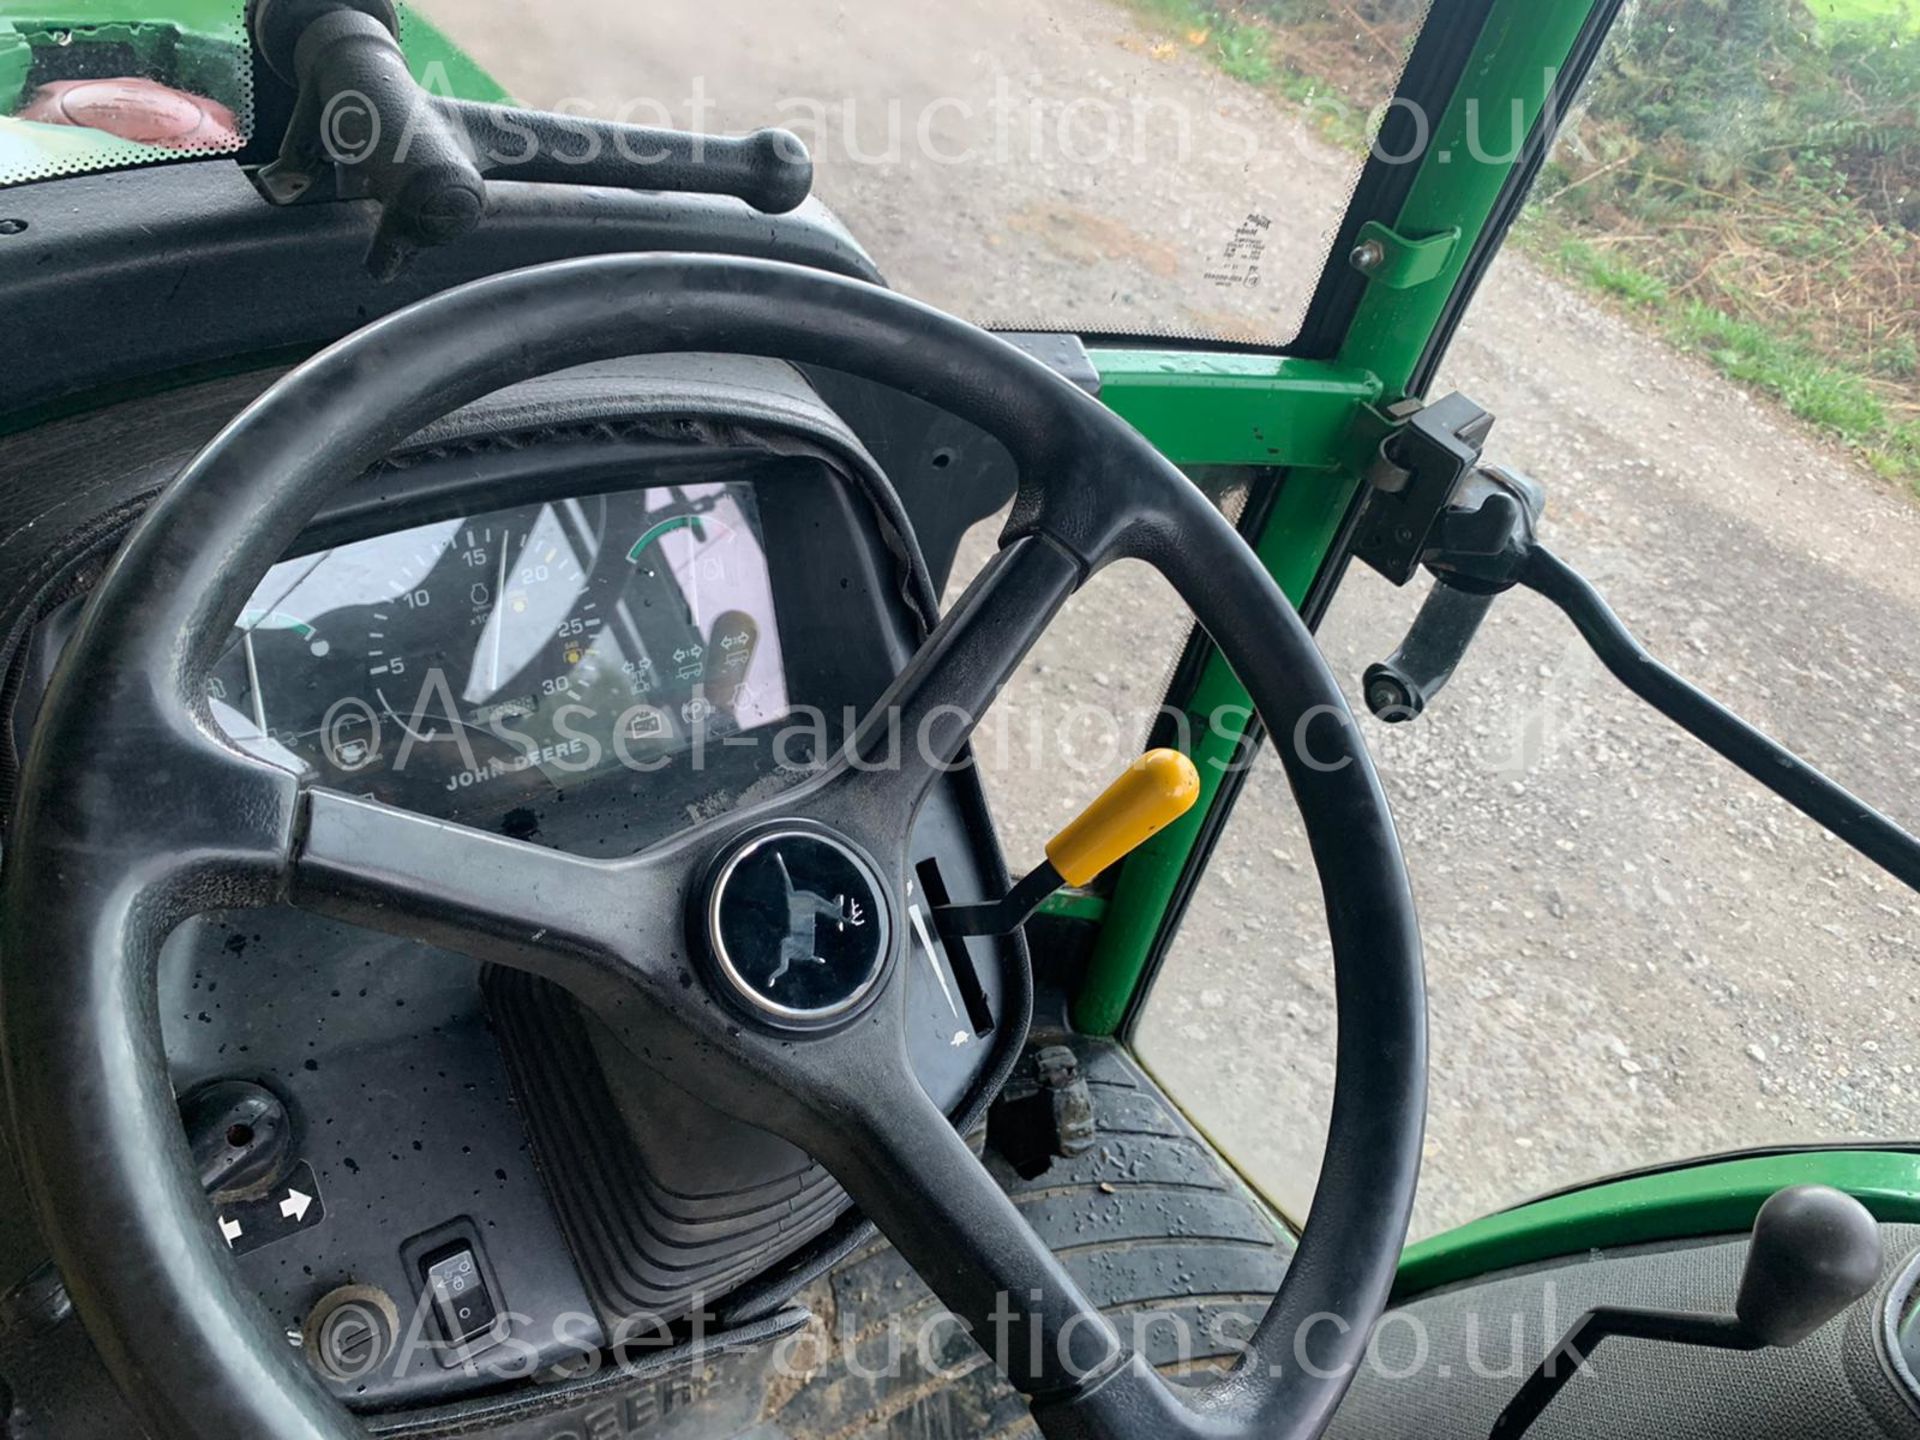 JOHN DEERE 4300 32hp 4WD COMPACT TRACTOR, RUNS DRIVES AND WORKS, CABBED, REAR TOW, ROAD KIT - Image 7 of 9